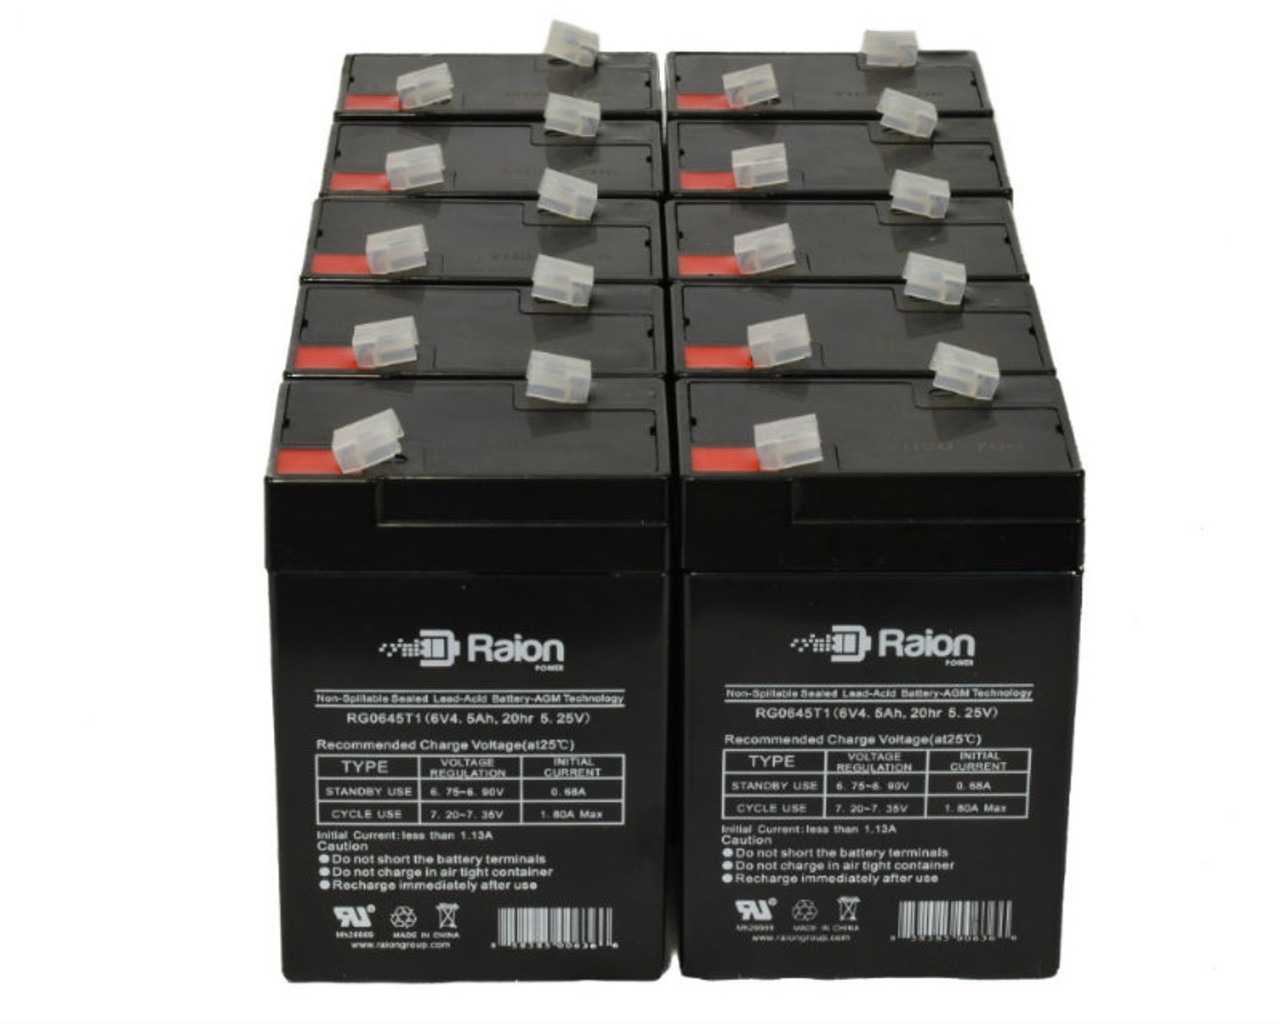 Raion Power 6V 4.5Ah Replacement Emergency Light Battery for National Power GS012P3-LL - 10 Pack